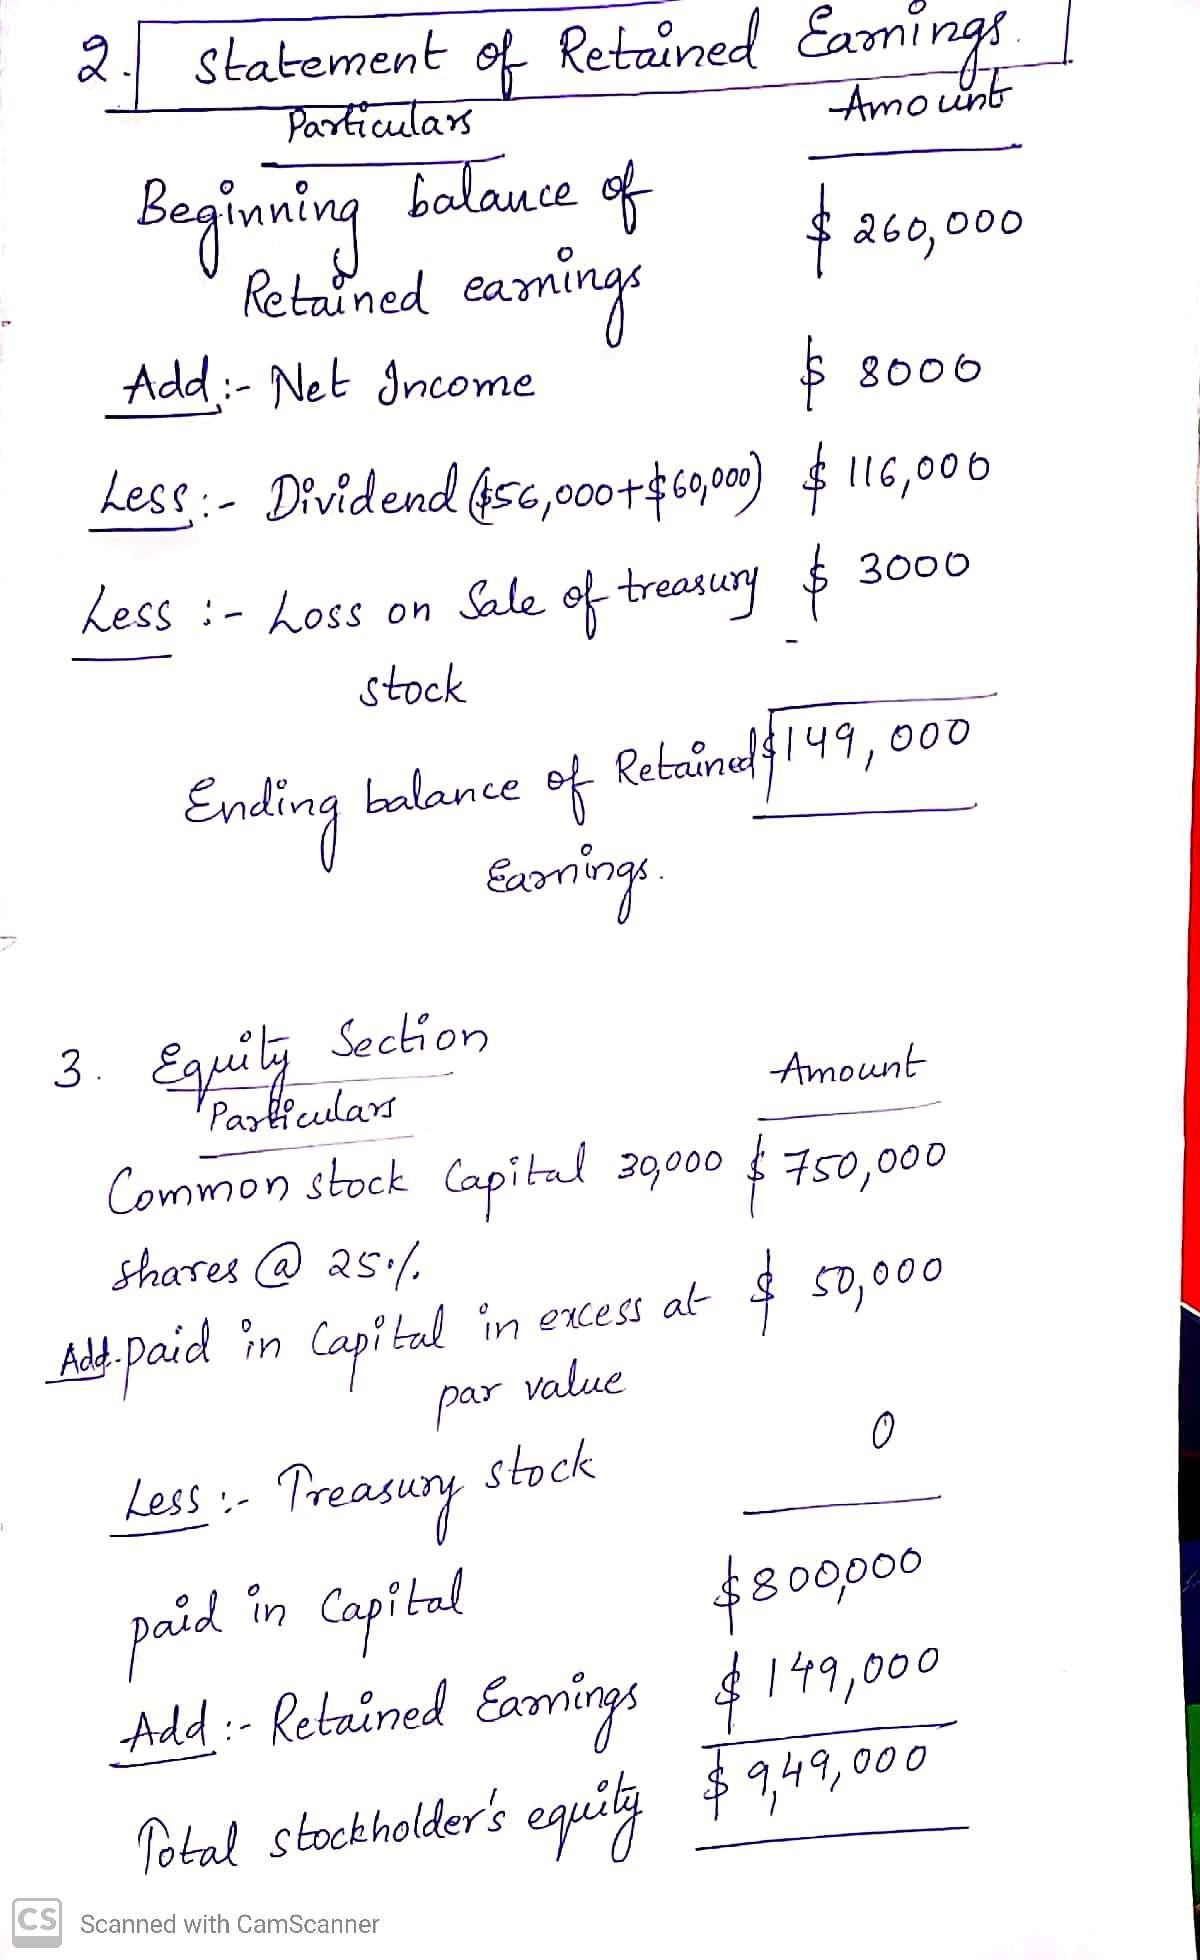 2 2. statement of Retained Eamings Particulars Amount Beginning balance of $ 260,0 000 Retained earnings Add:- Net Income $ 8